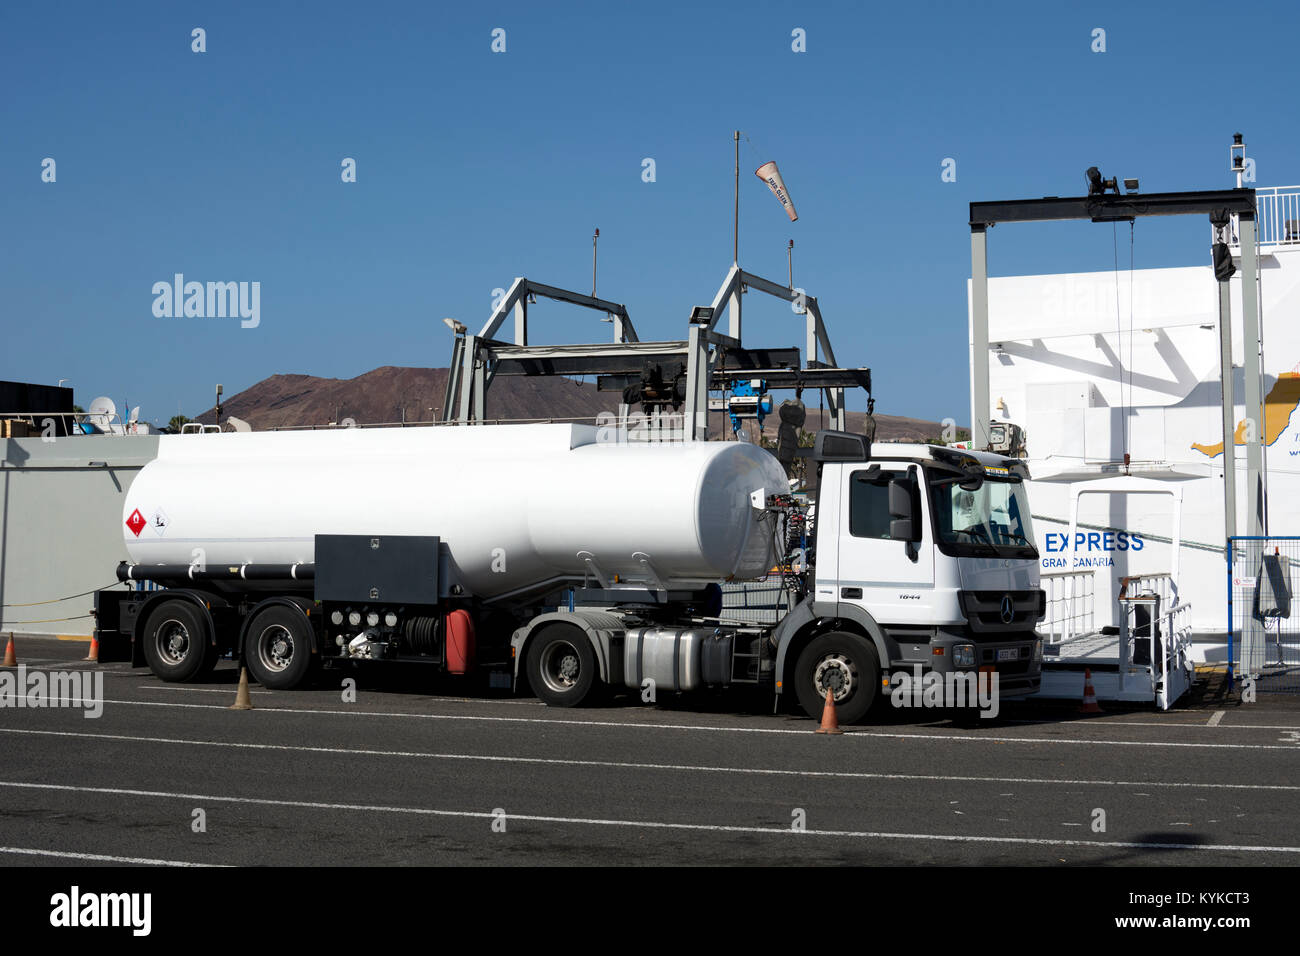 Fuel tanker lorry at Playa Blanca harbour, Lanzarote, Canary Islands, Spain. Stock Photo